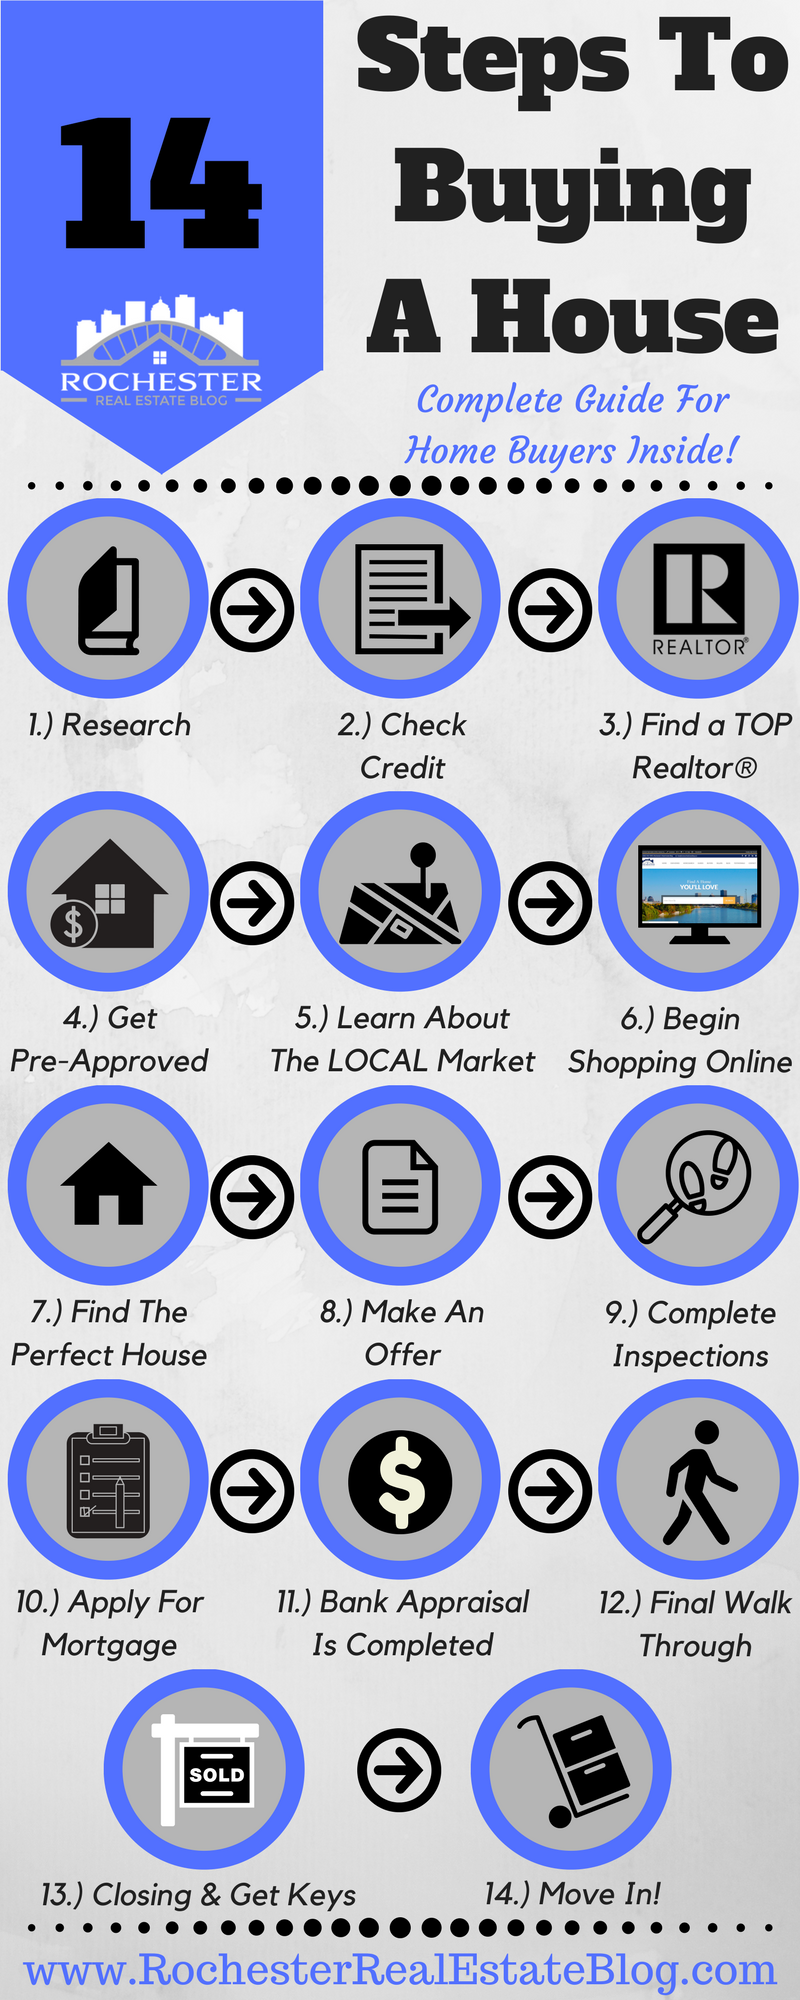 14-Steps-To-Buying-A-House-A-Complete-Guide-For-Home-Buyers